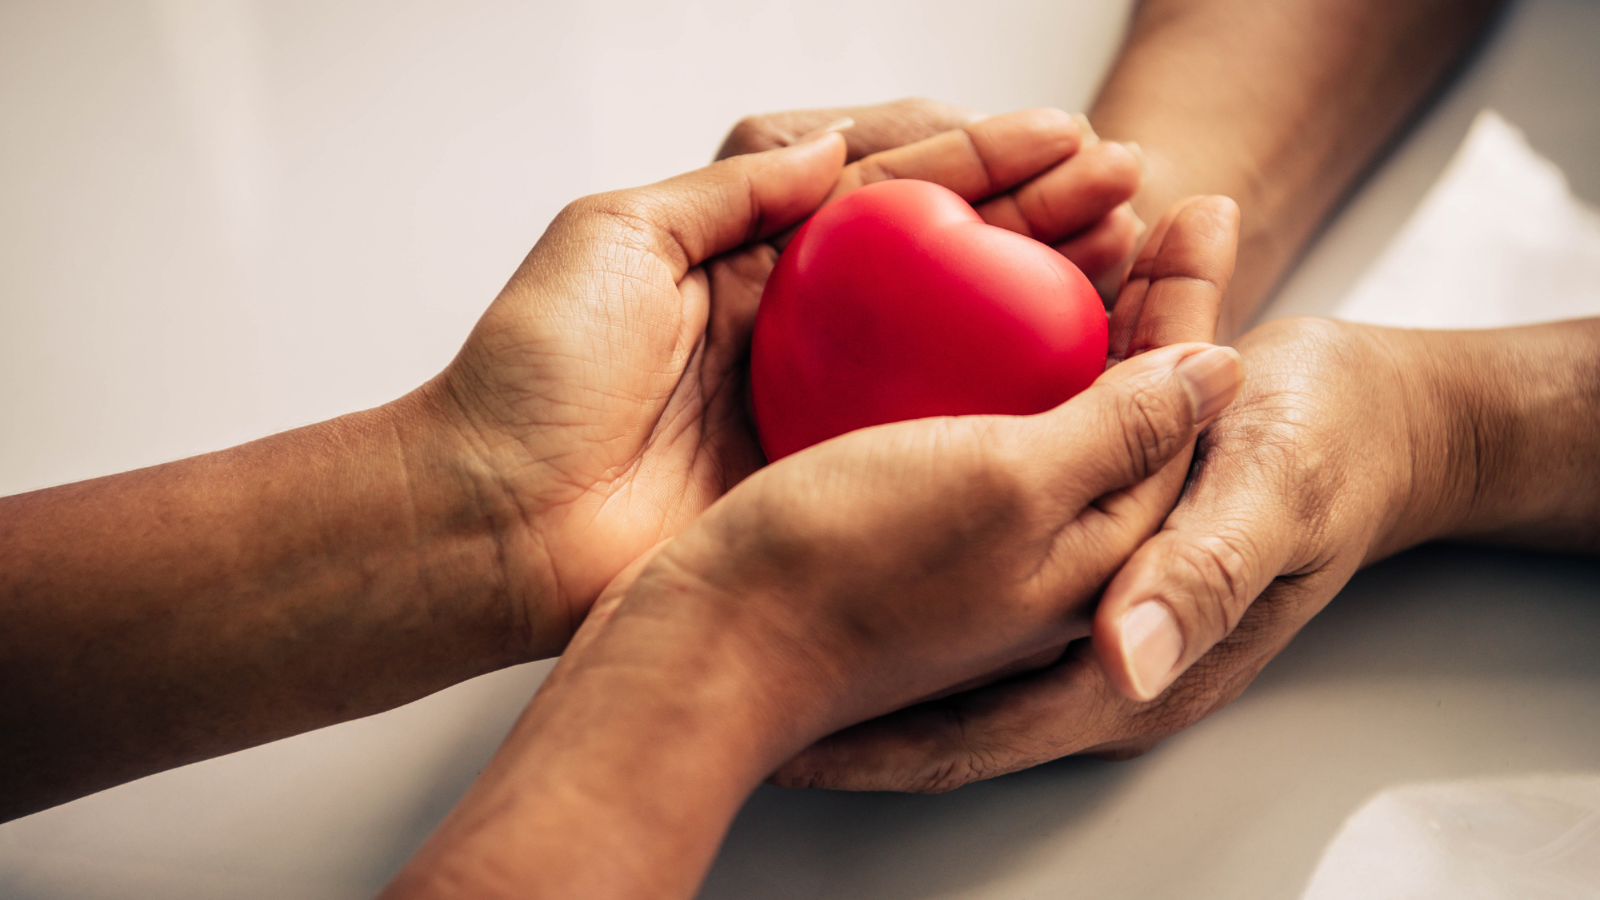 Do You Have a Heart Disease Risk Factor? Physical Therapy Can Help